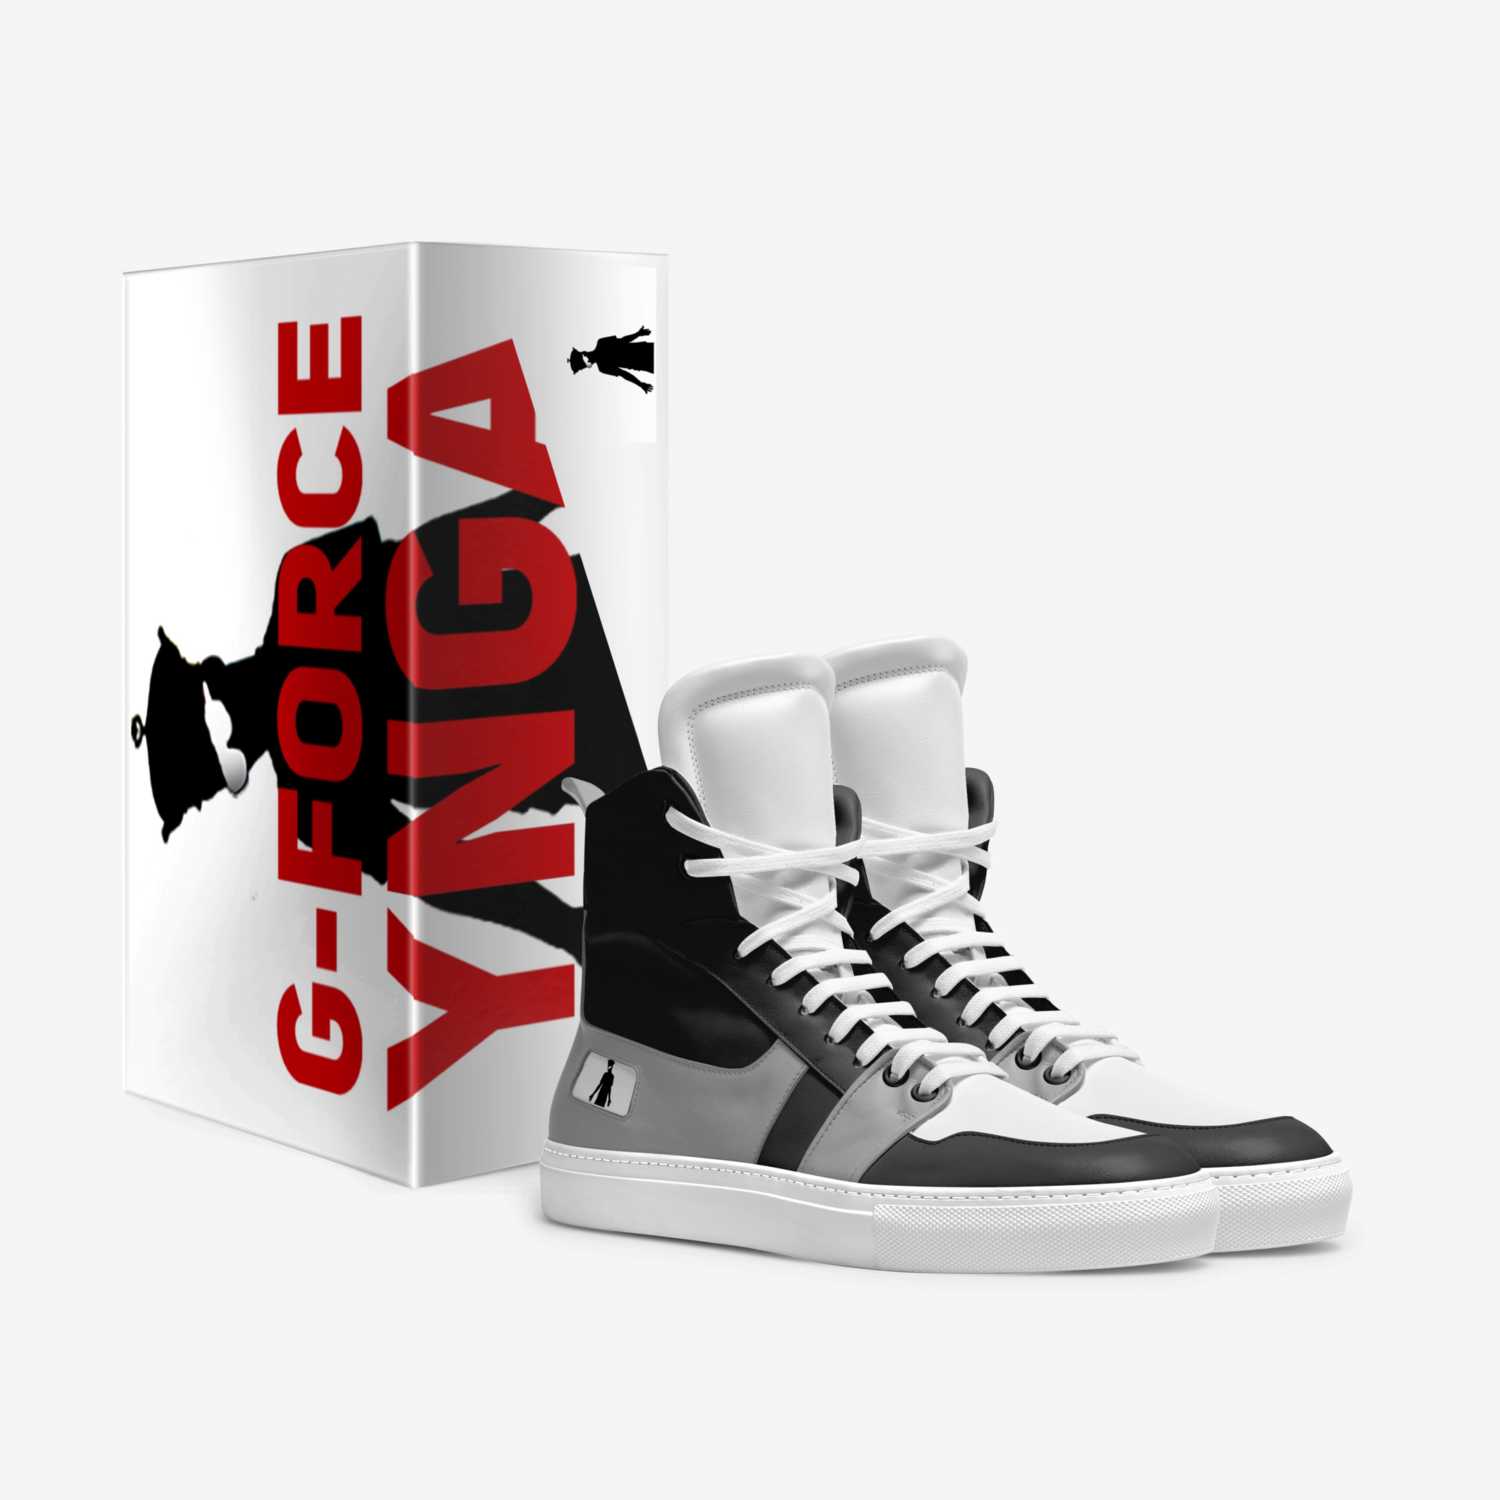 YNGA G Force 1 custom made in Italy shoes by Antonio Jackson | Box view